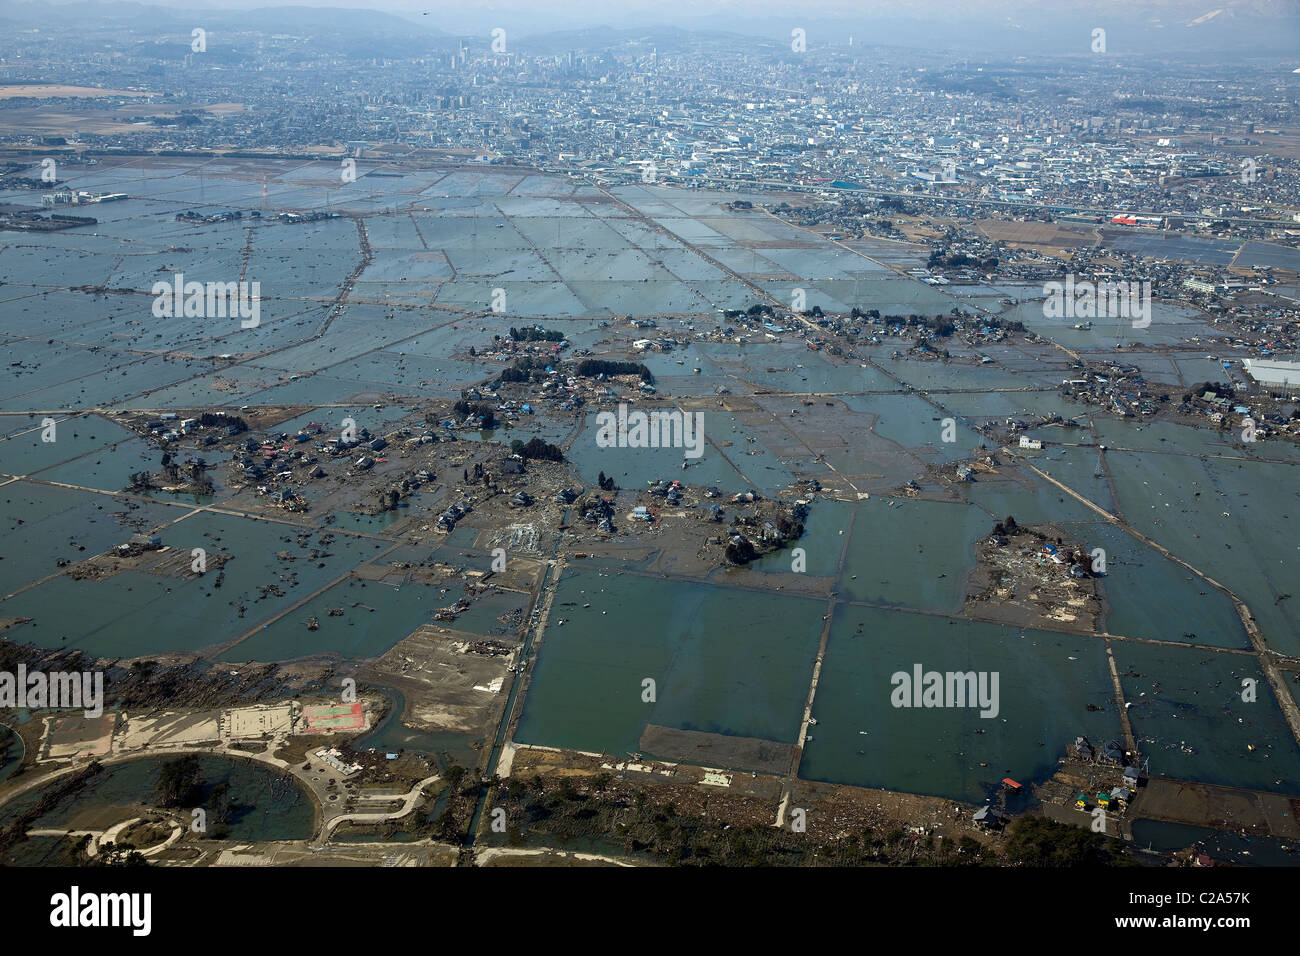 Aerial view of damage to Sendai, Miyagi Prefecture after a 9. 0 magnitude earthquake and subsequent tsunami devastated the area Stock Photo